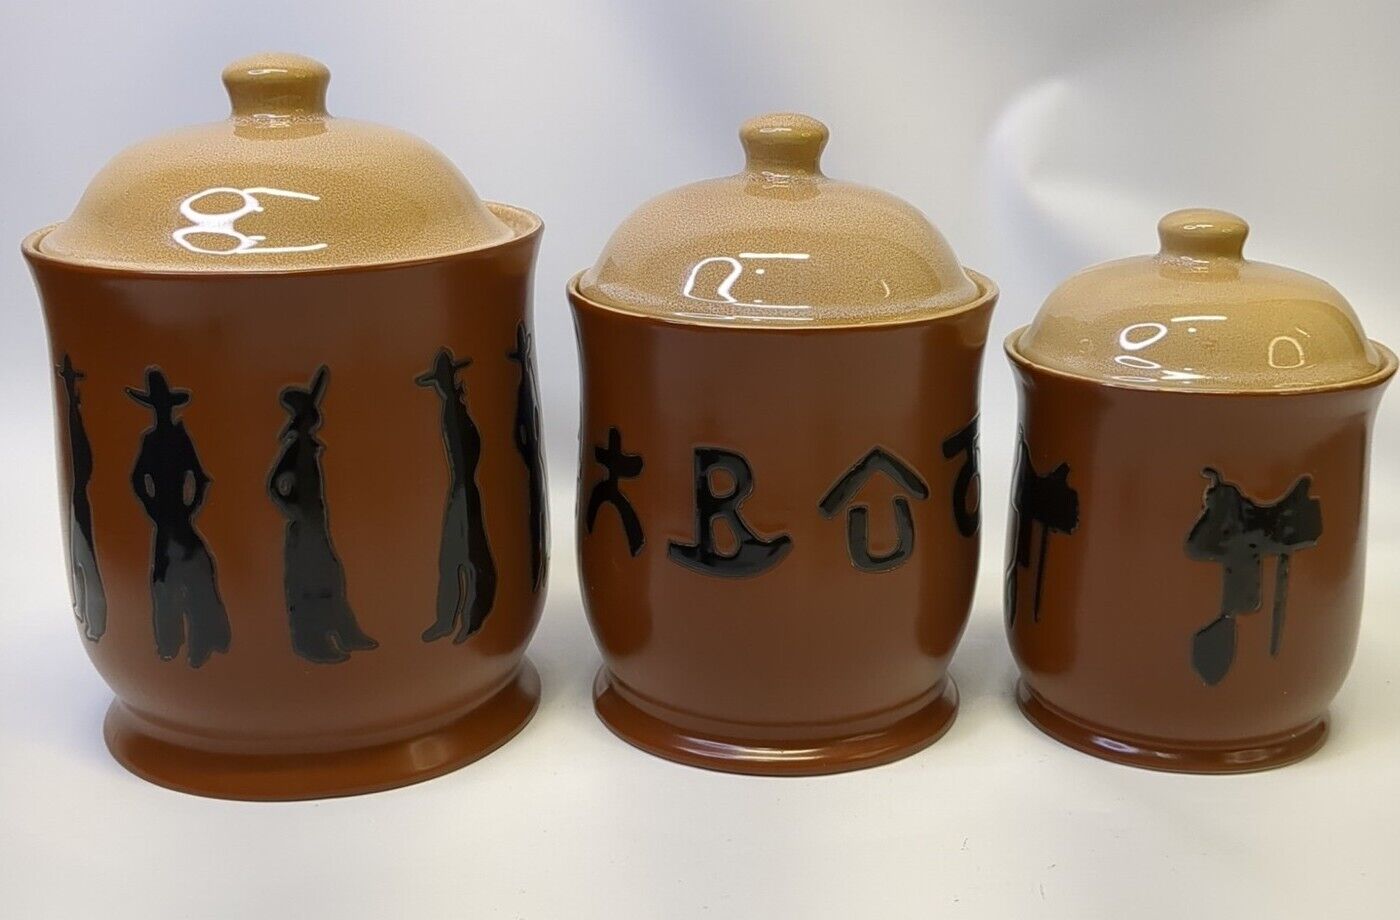 Vintage Buckaroo Pottery Canisters Set Of 3 Western Yellowstone Cabin Core